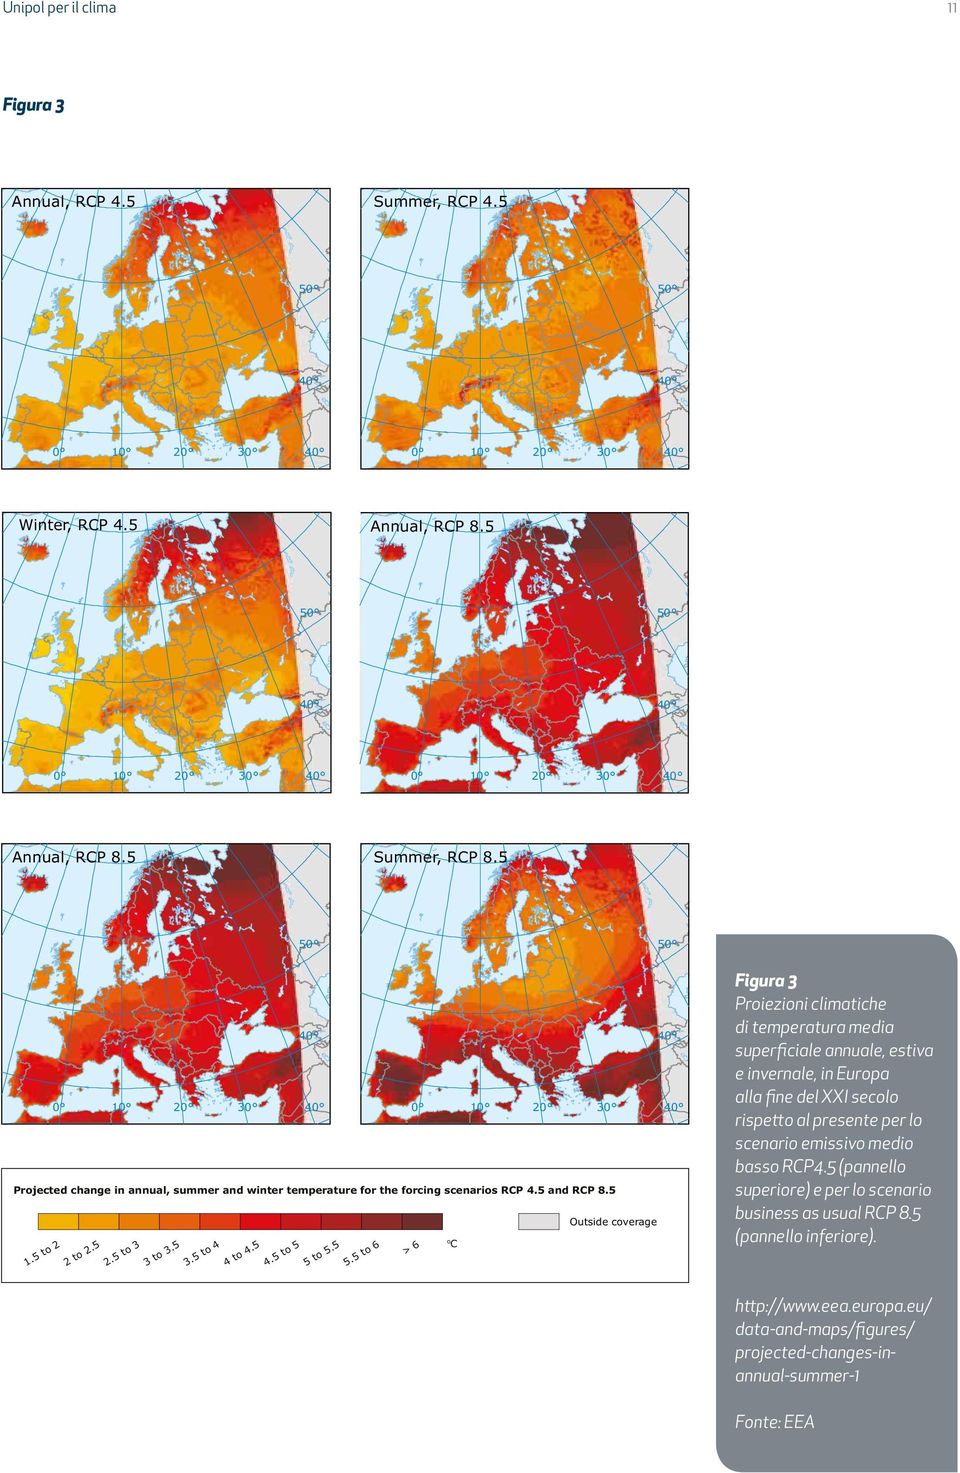 5 10 20 30 30 0 0 10 10 20 20 30 30 0 10 20 30 0 10 30 0 10 20 30 20 Winter, RCPchange 8.5 Projected in annual, summer and winter temperature for the forcing scenarios RCP 4.5 and RCP 8.